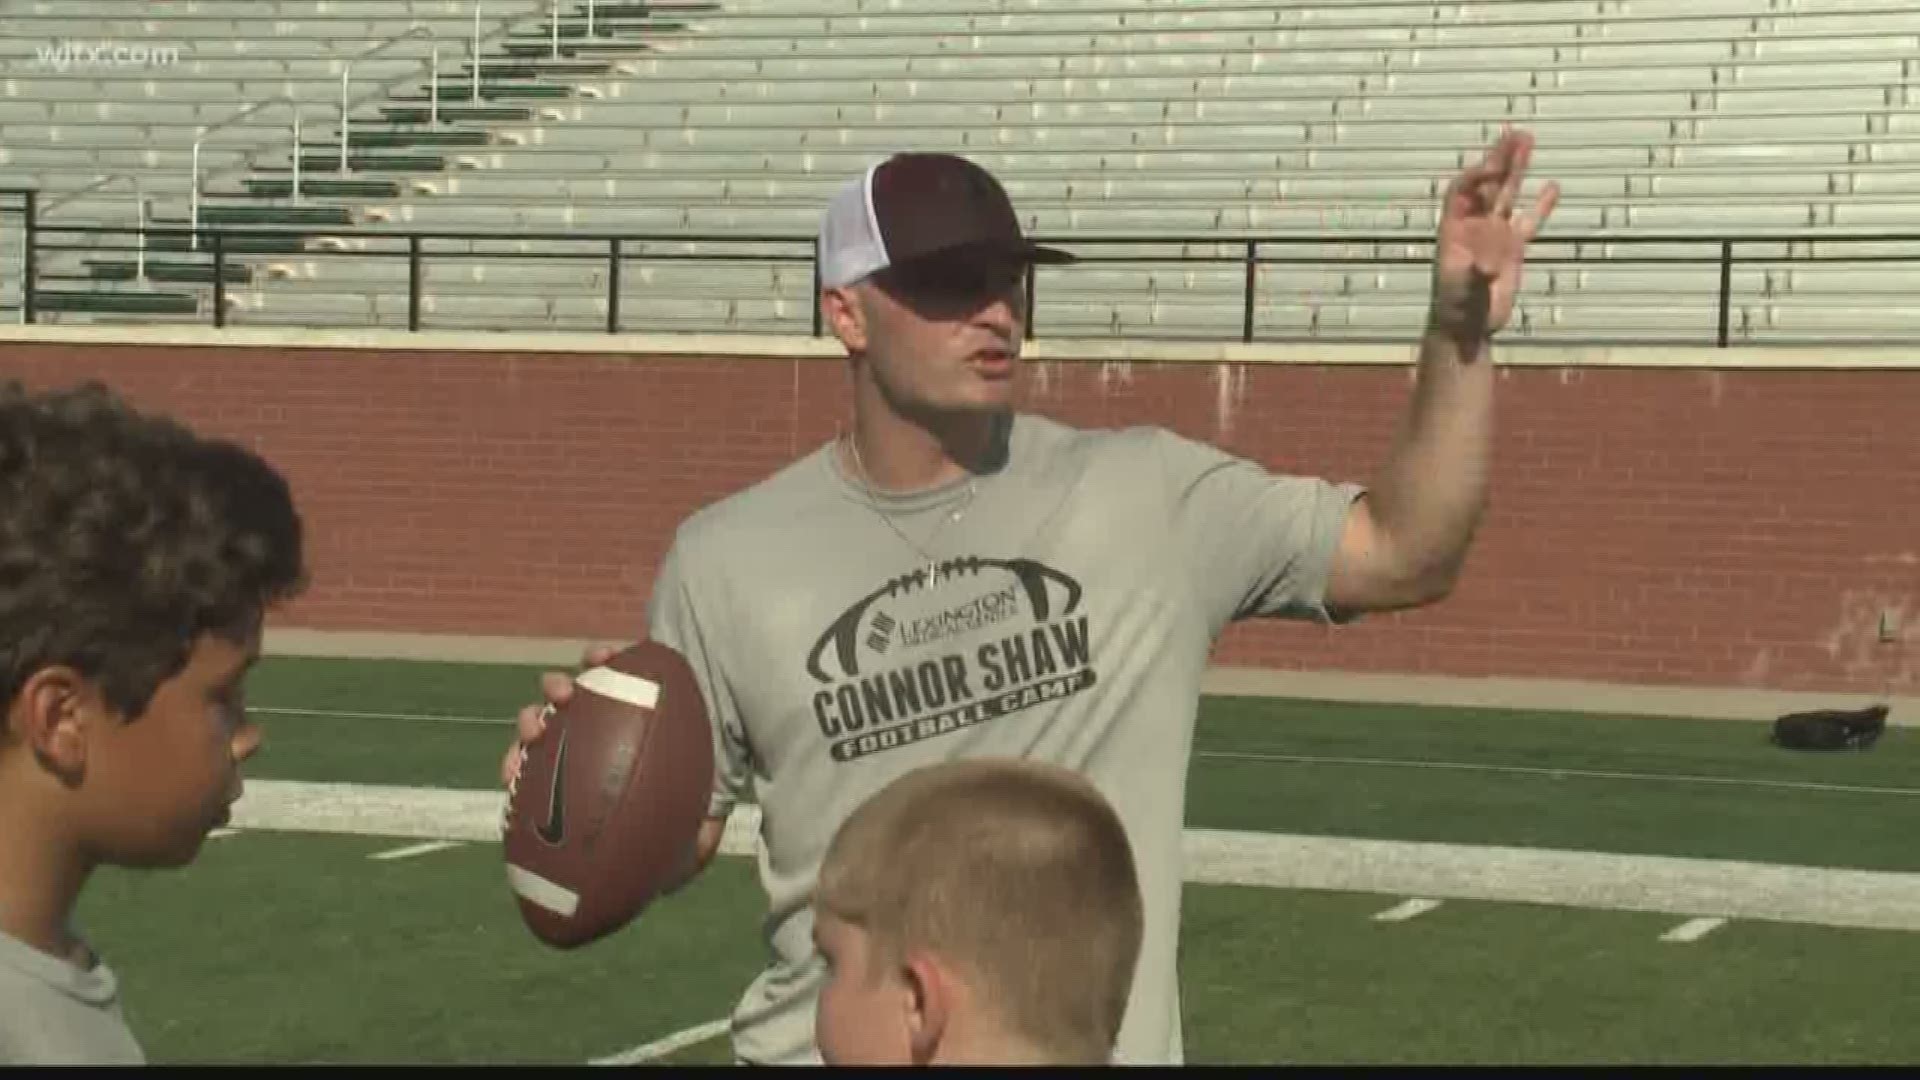 Former USC and NFL quarterback Connor Shaw was hired this week as the tight ends coach of the Furman Paladins.